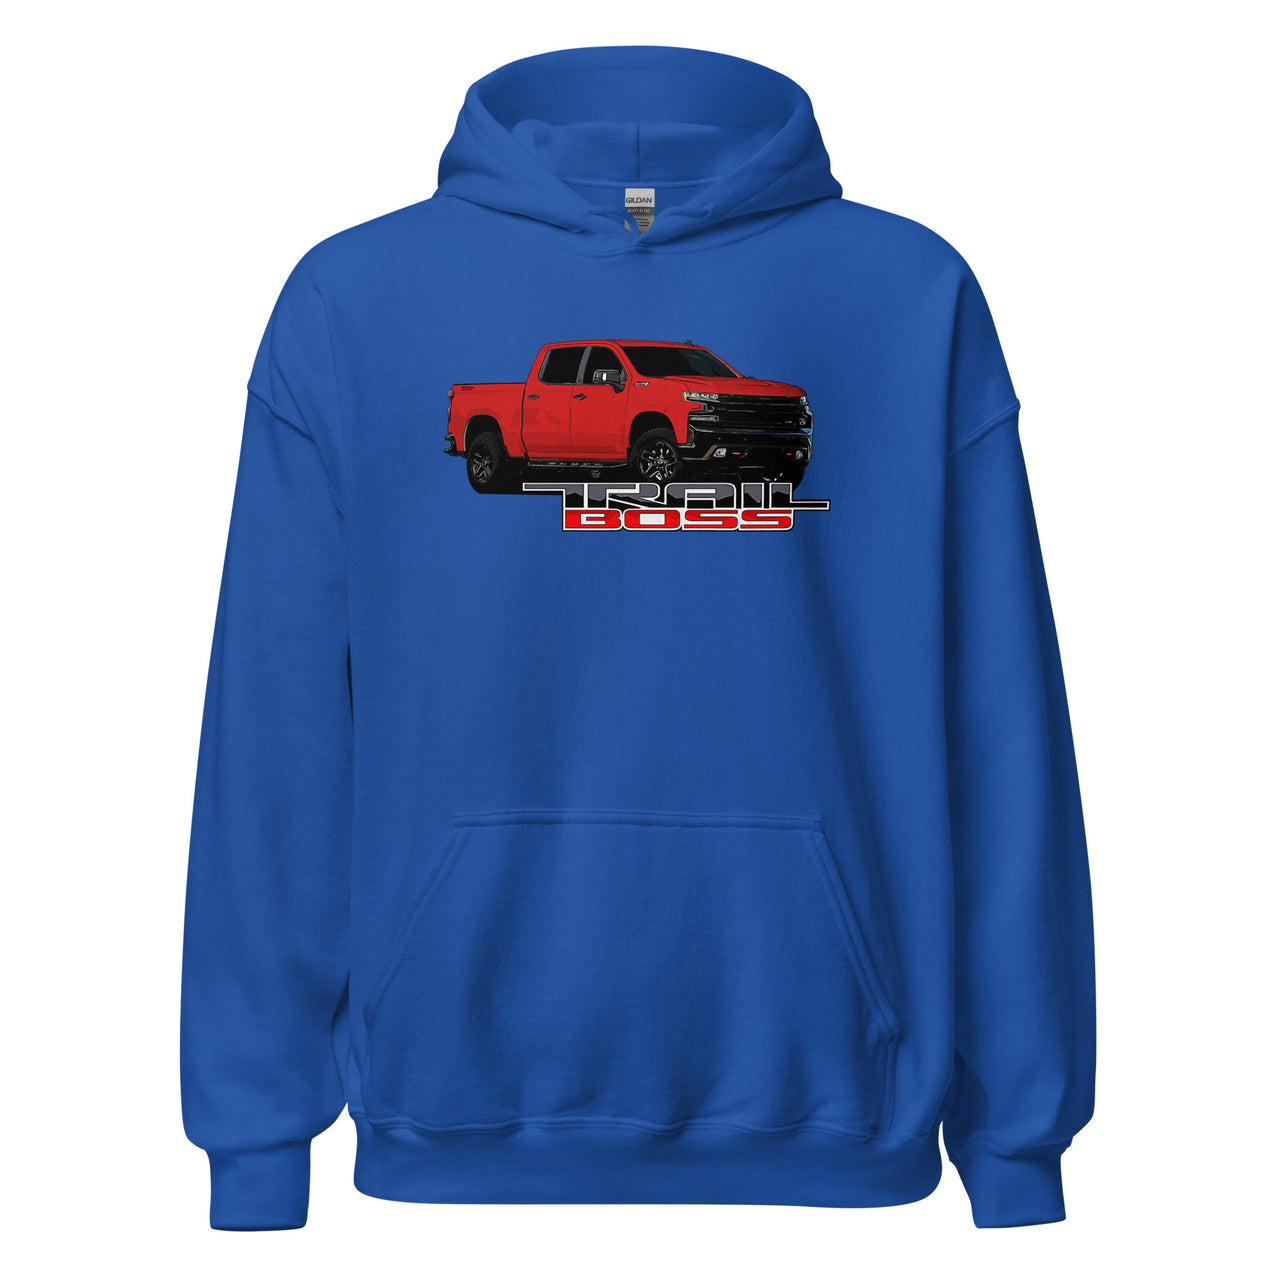 Red Trail Boss Truck Hoodie in royal